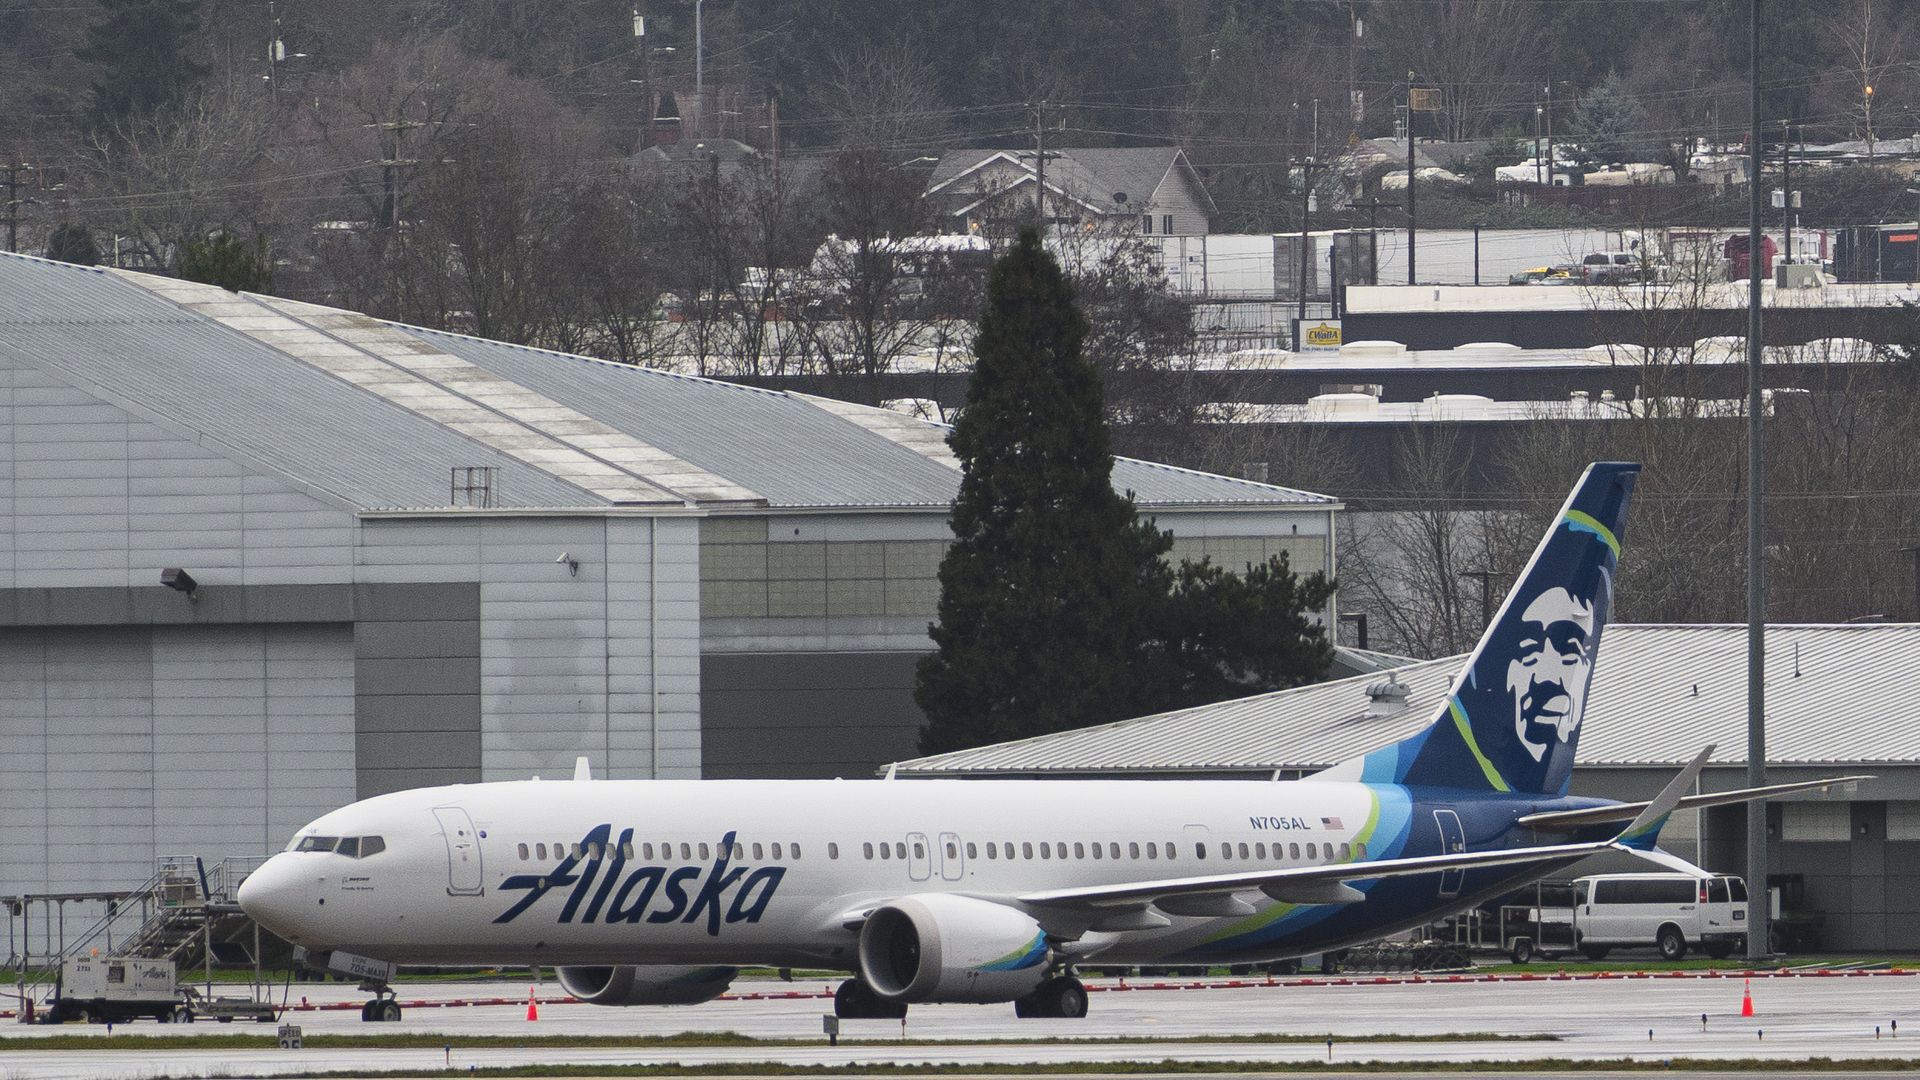 Alaska Airlines Boeing 737 MAX 9 aircraft N705AL is seen grounded in Portland on Jan. 9.